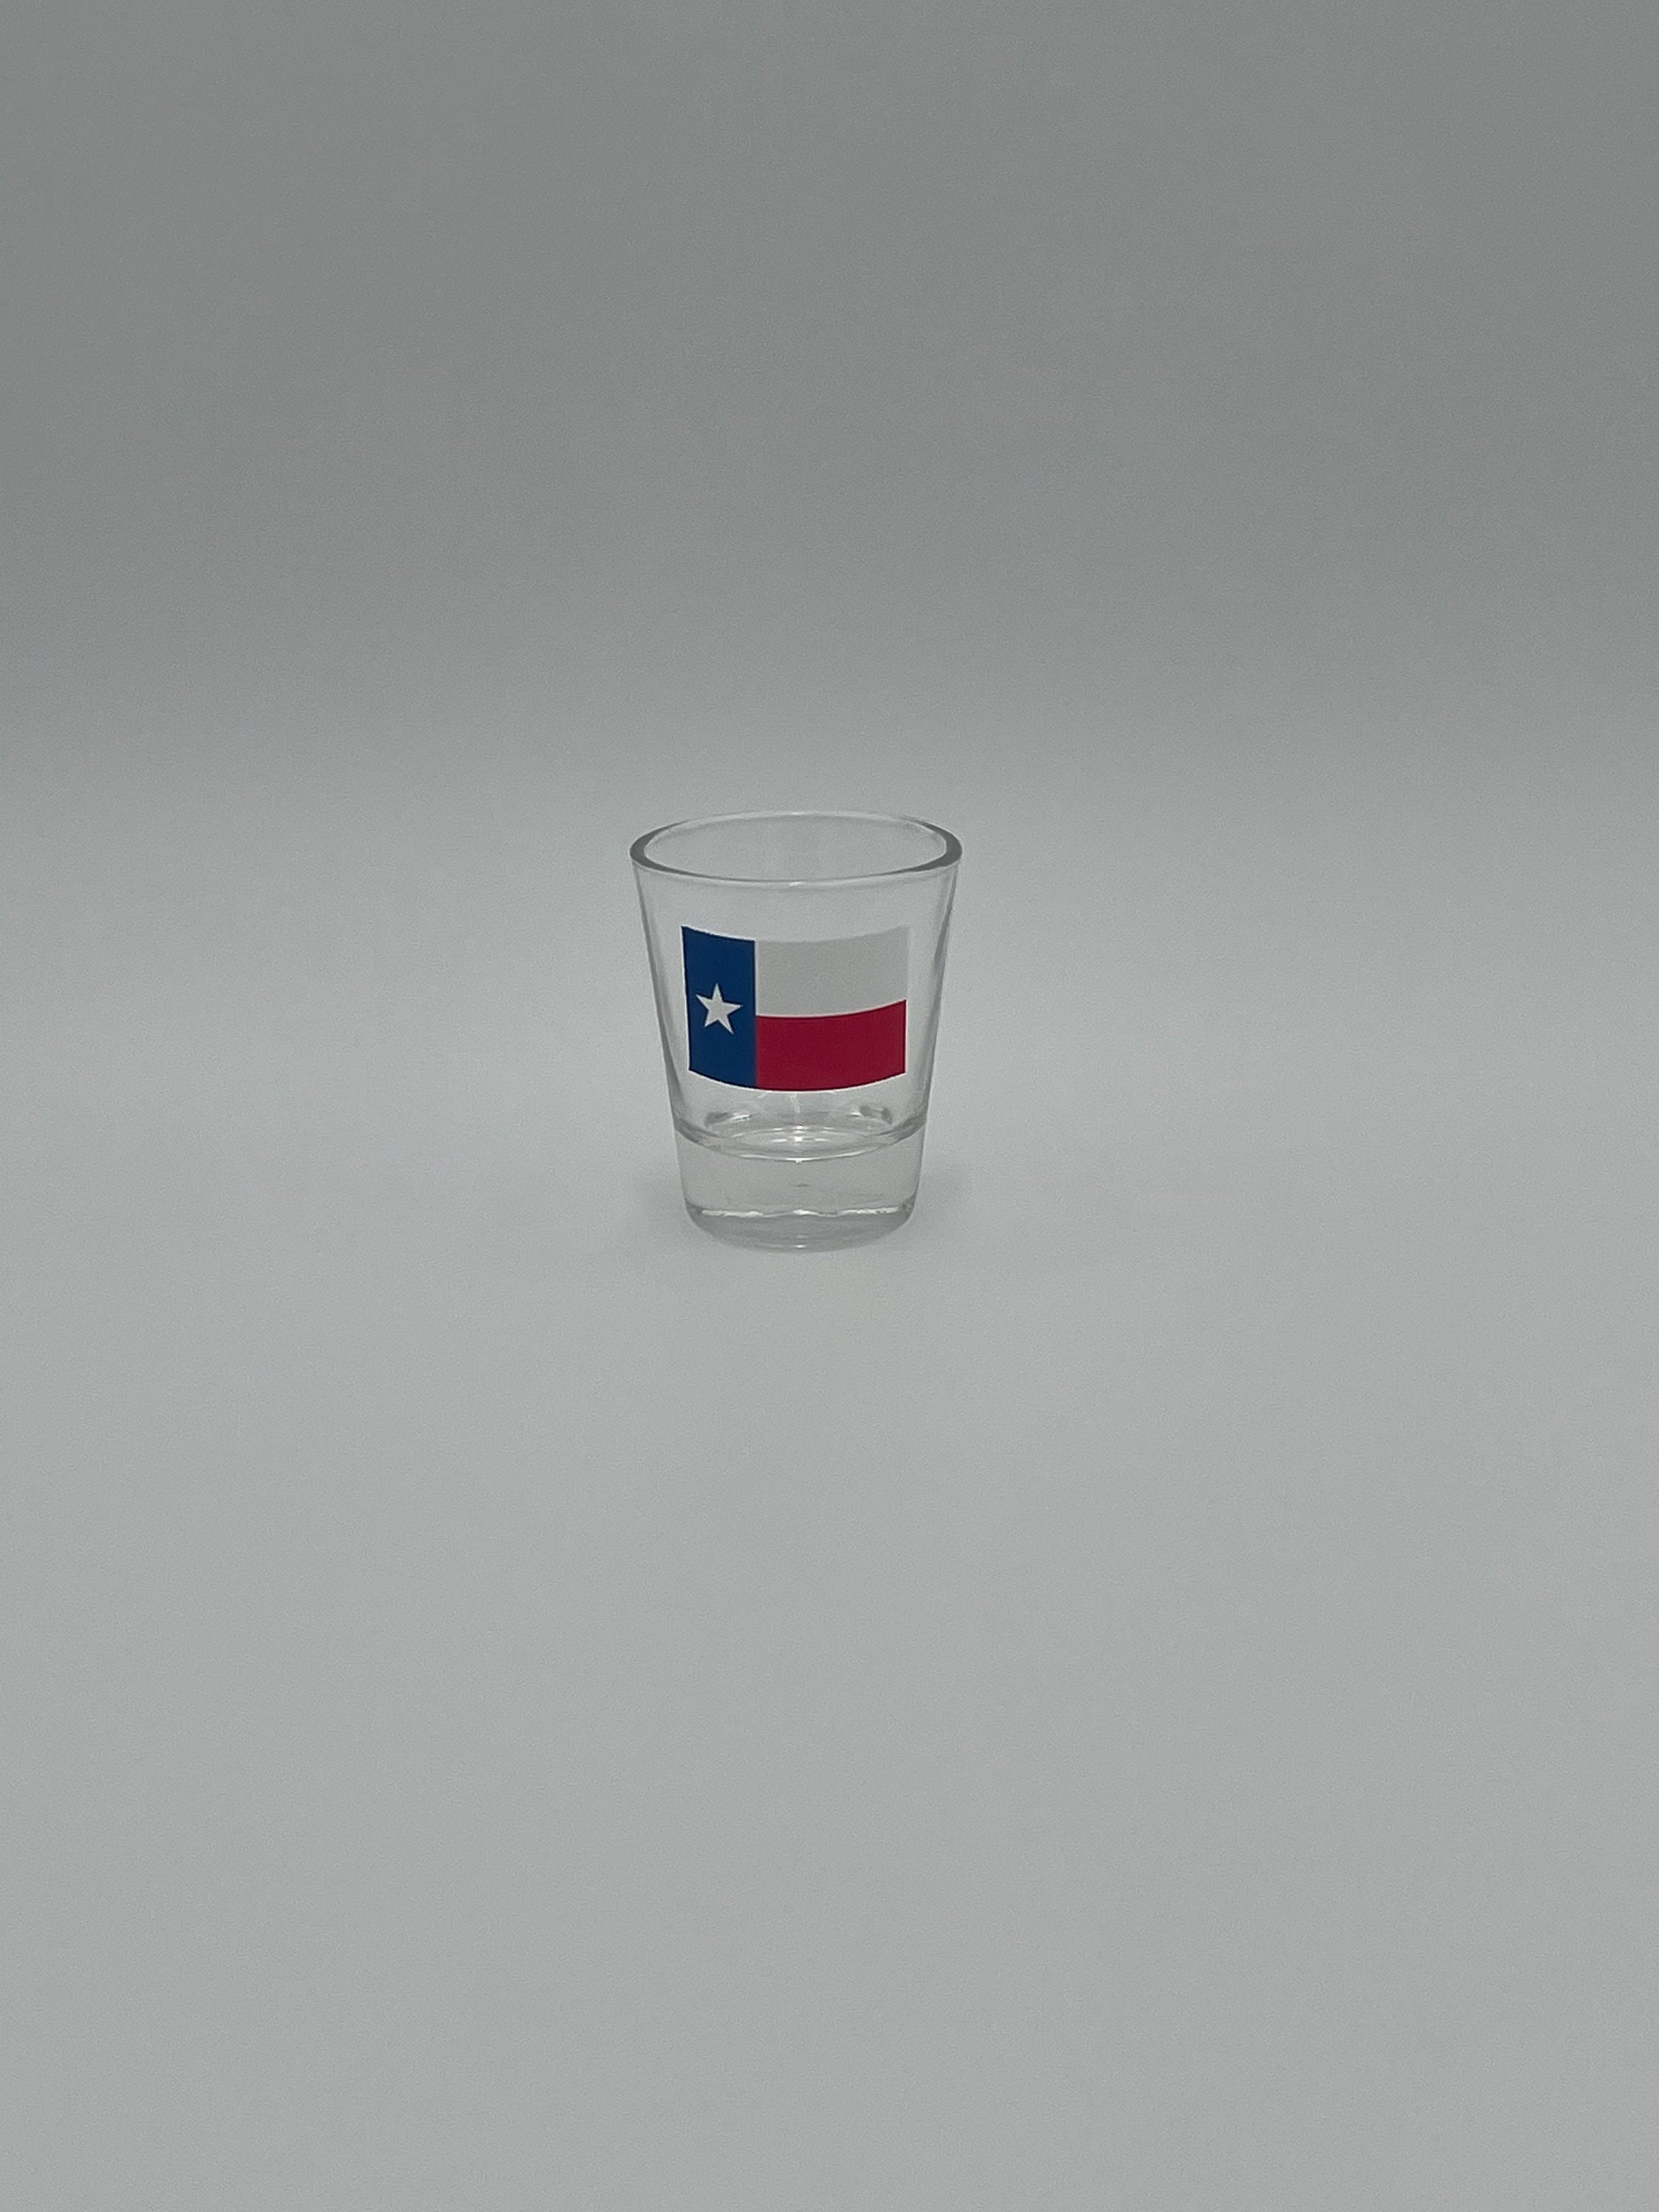 COLLECTIBLE TEXAS JIGGER SHOT GLASS EXTRA LARGE SIZE 12 OZ. RED ACL  ASTRODOME